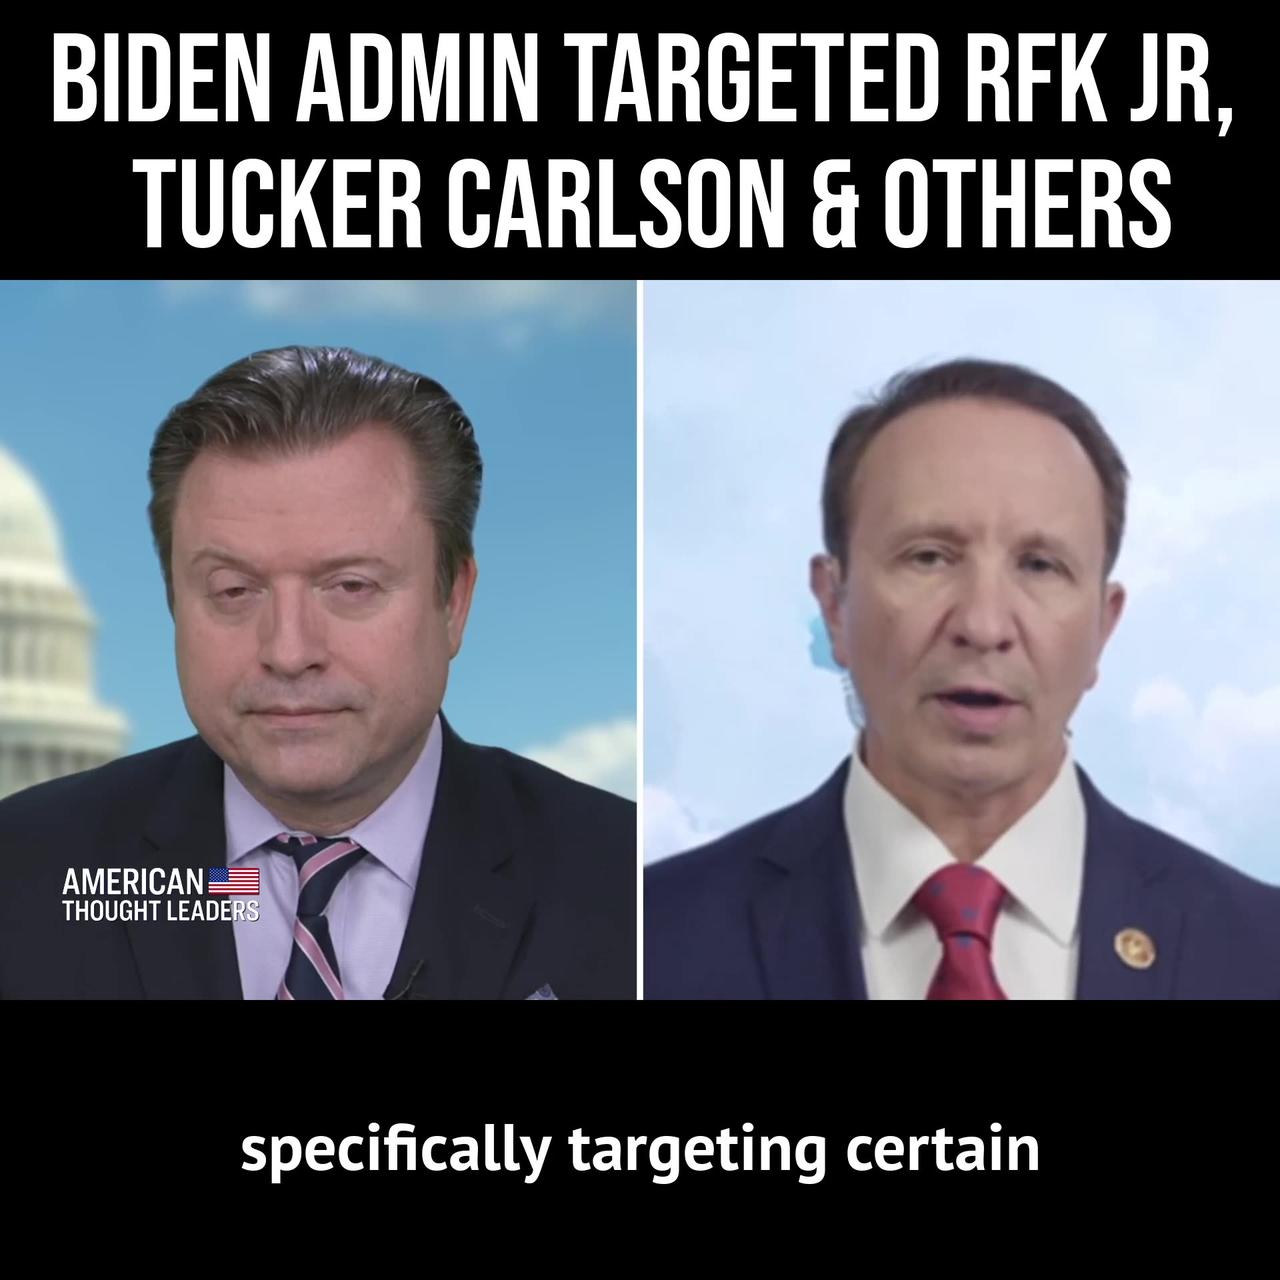 Biden’s Censorship Frenzy Comes to an End After Ordering the Takedown of Posts from RFK Jr. & Tucker Carlson